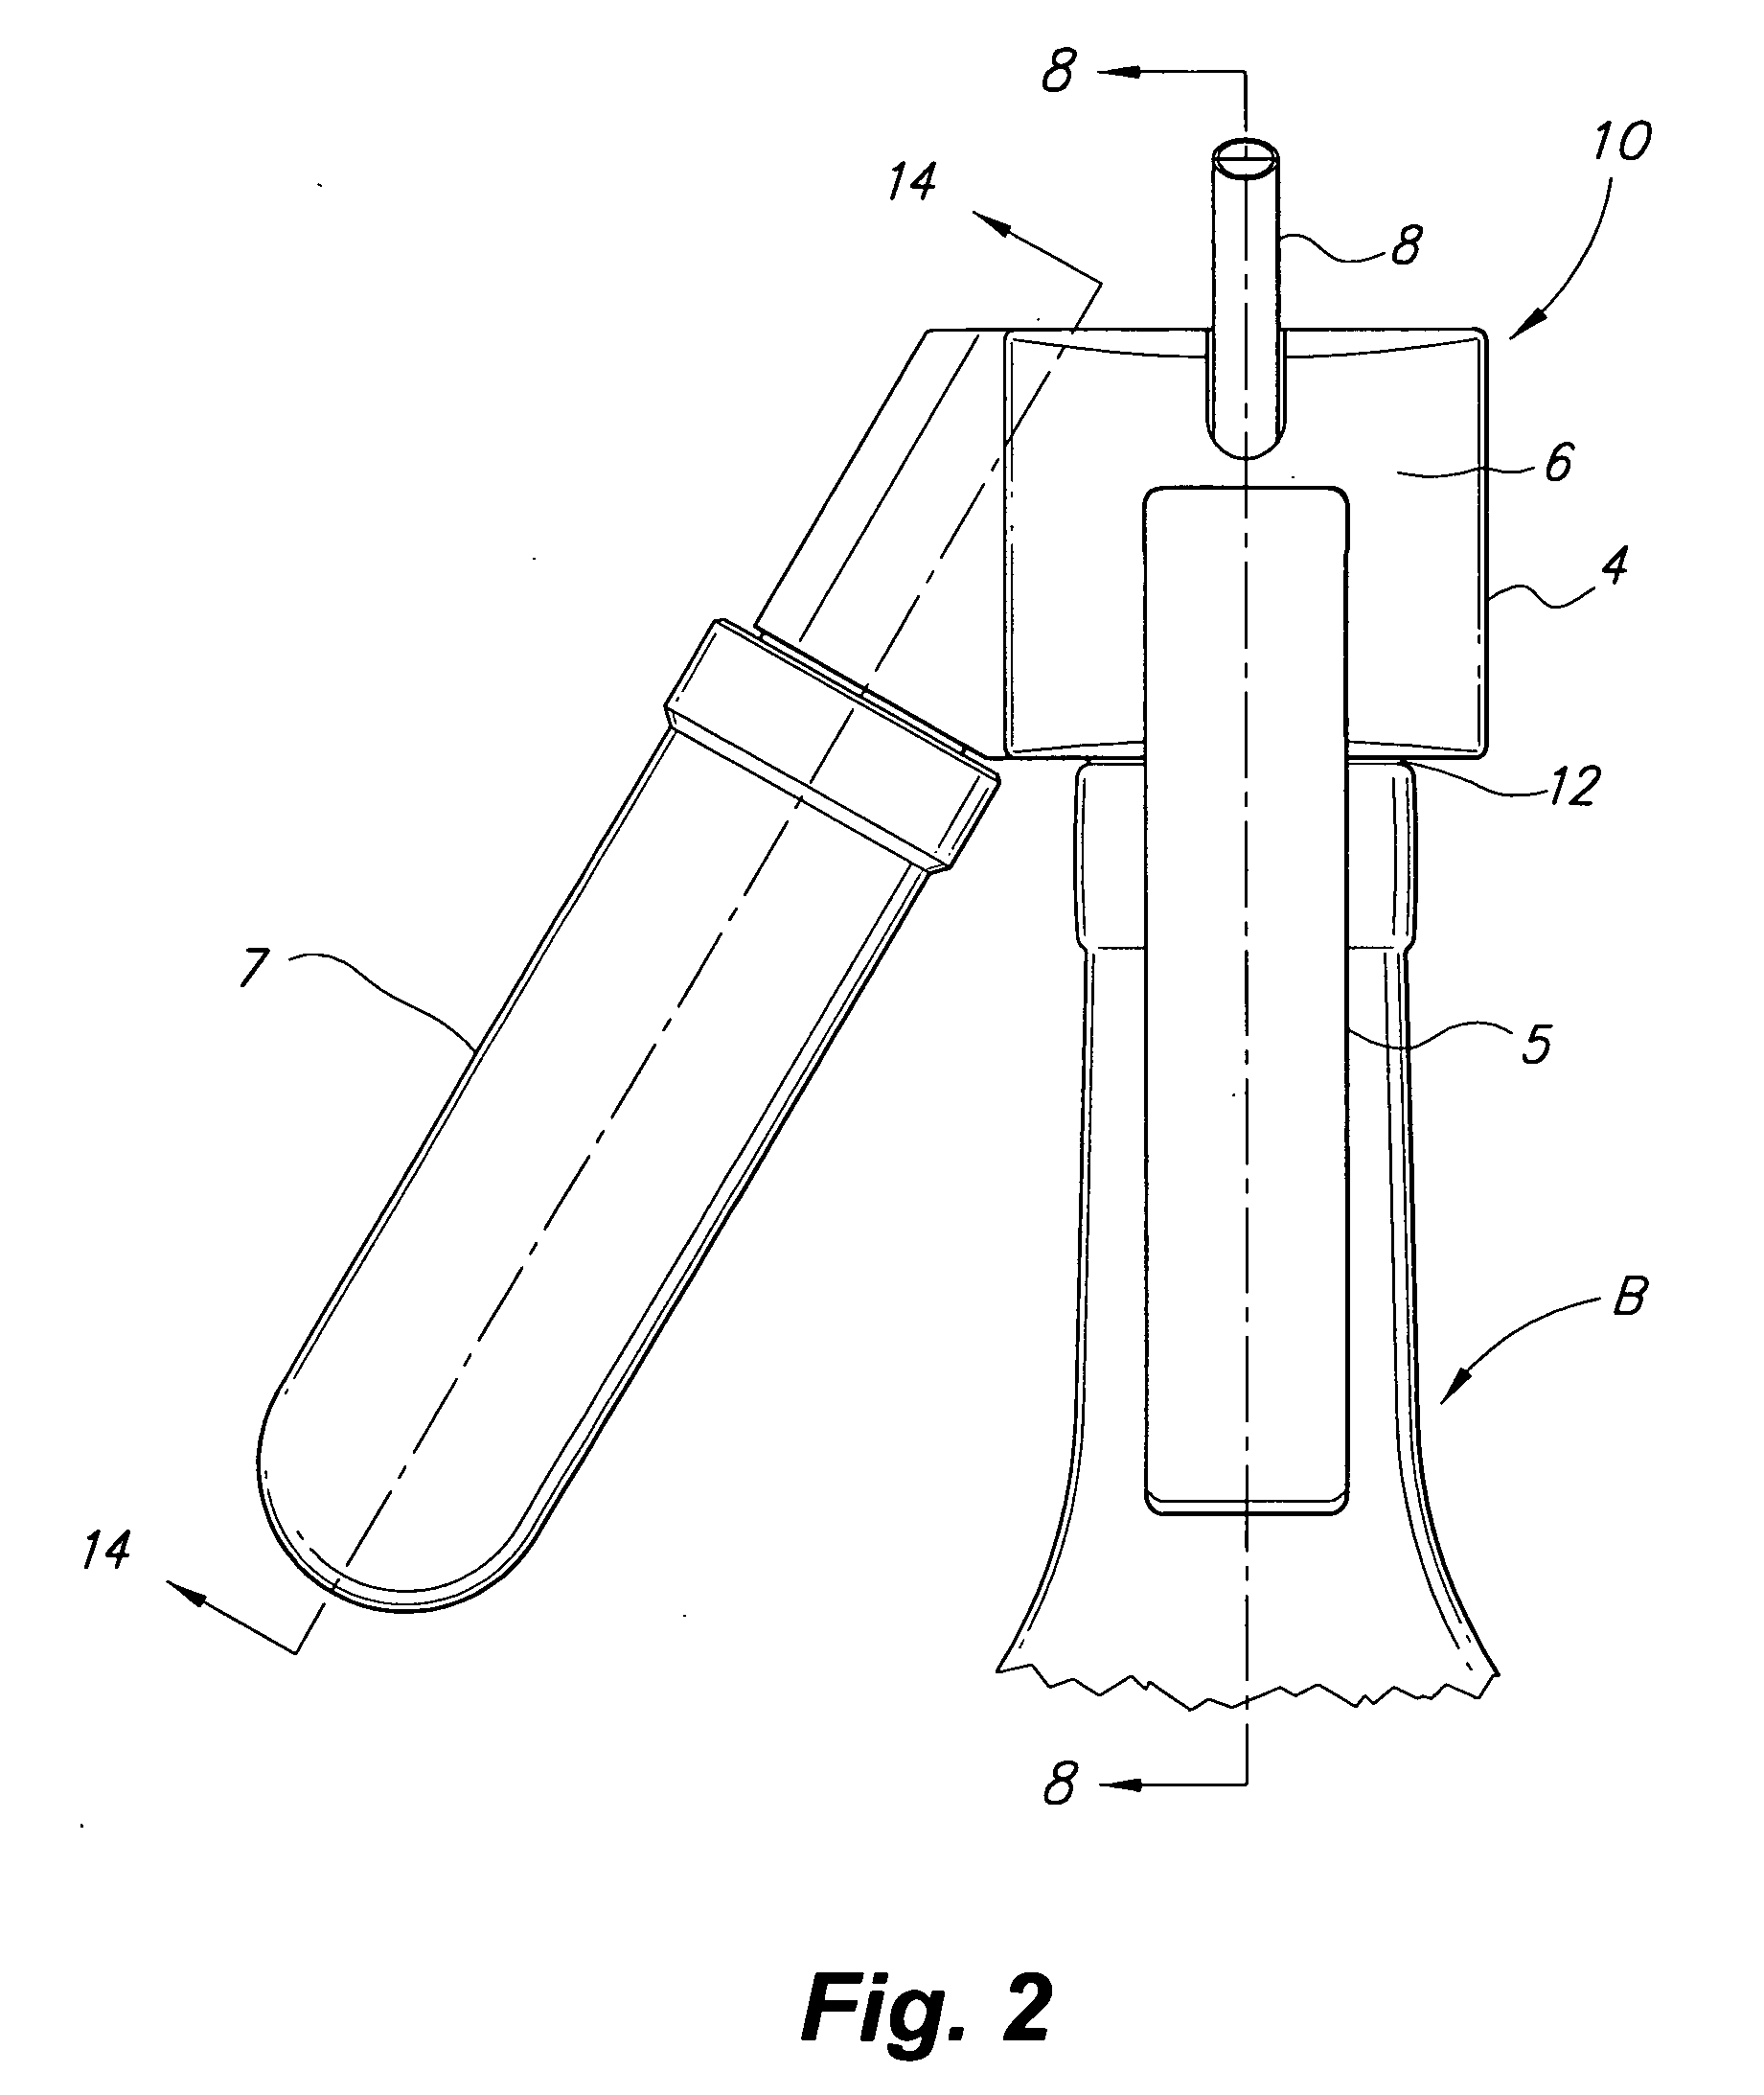 Wine bottle sealing and dispensing device